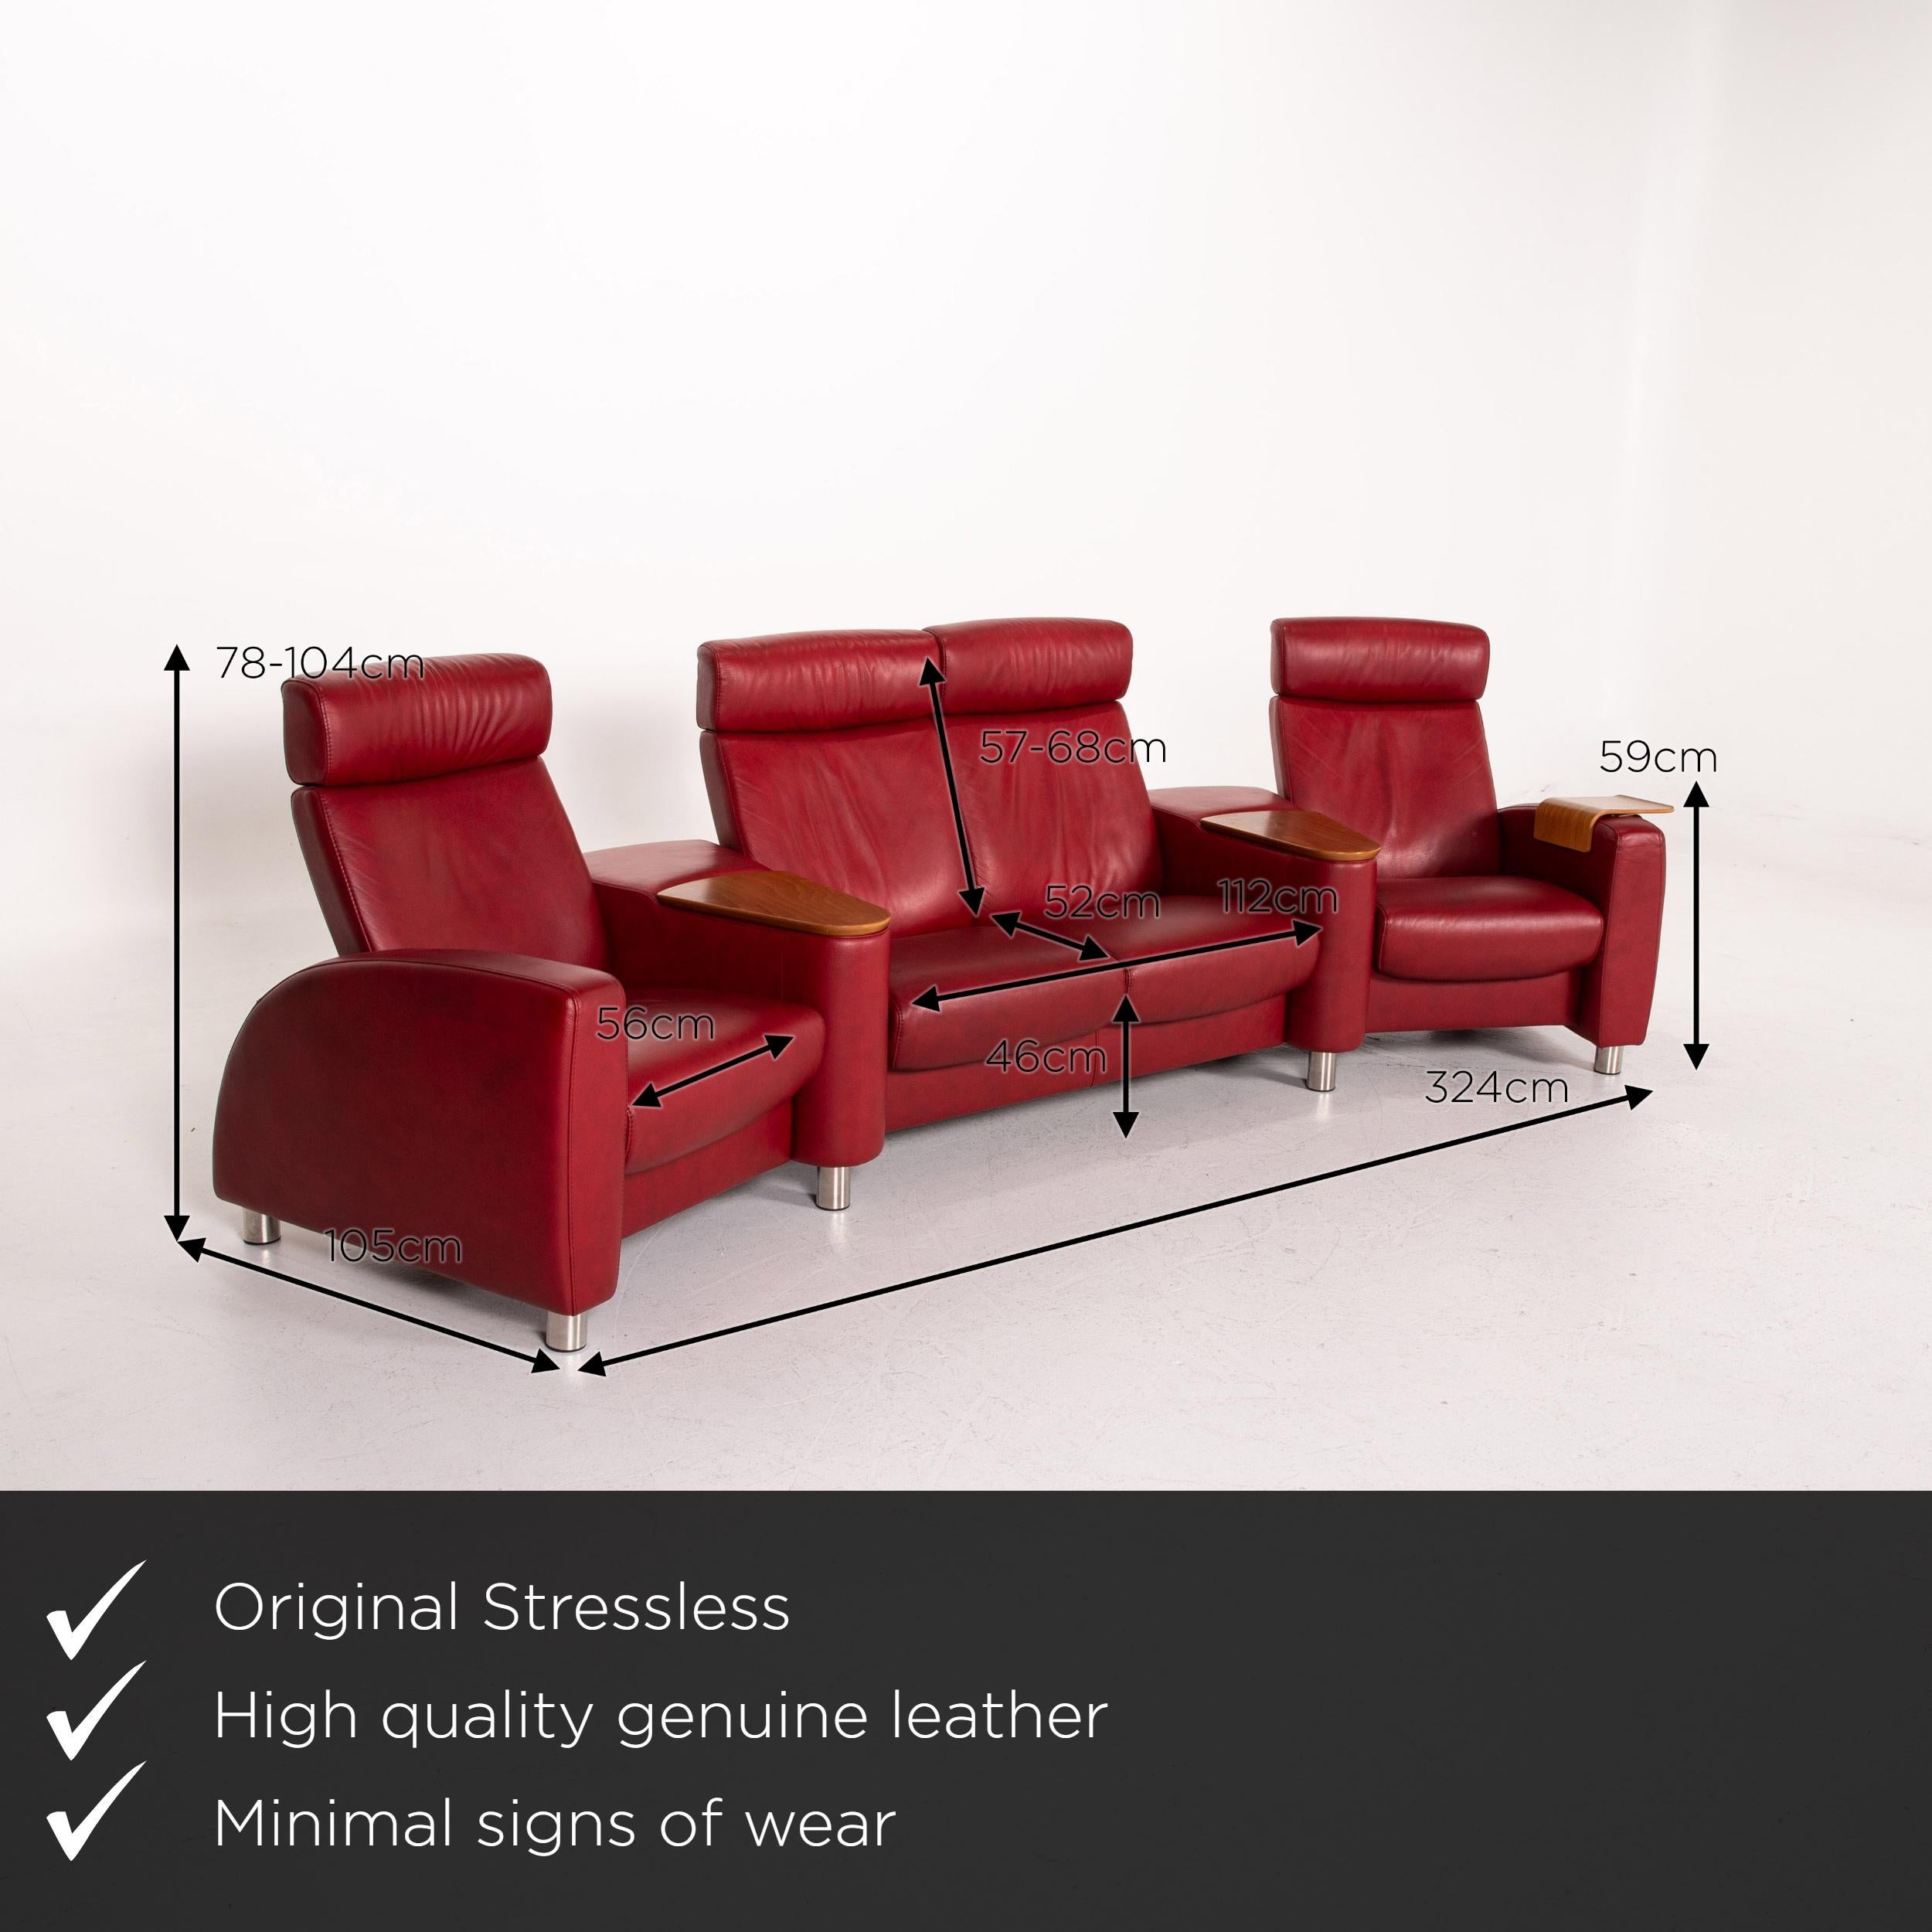 We present to you a Stressless Arion leather sofa red four-seat home theater relaxation function.

 

 Product measurements in centimeters:
 

Depth 105
Width 324
Height 78
Seat height 46
Rest height 59
Seat depth 52
Seat width 56
Back